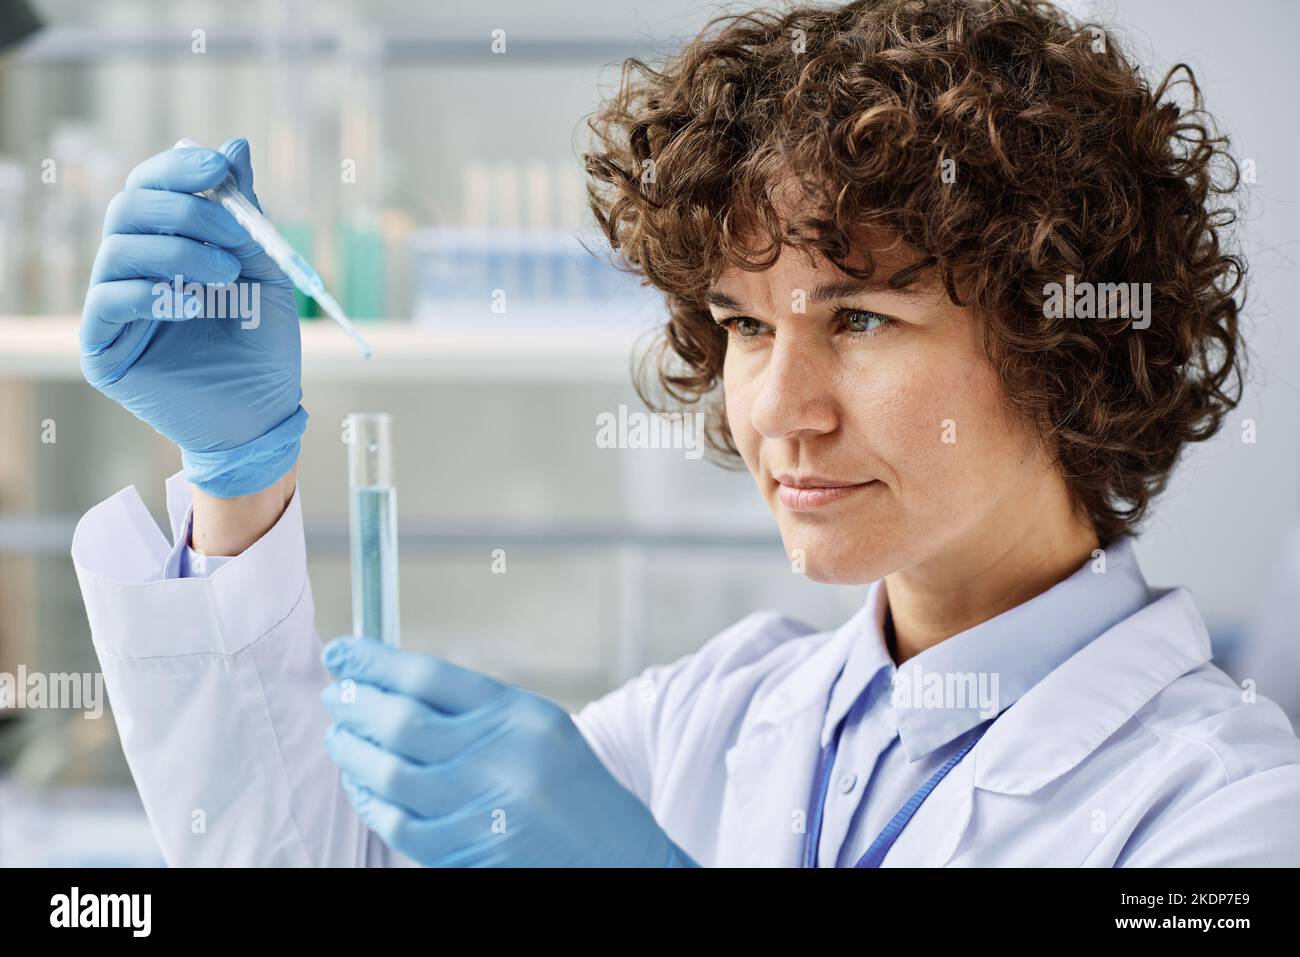 Young clinical expert in labcoat adding drop of liquid substance to another one during work over new scientific research Stock Photo